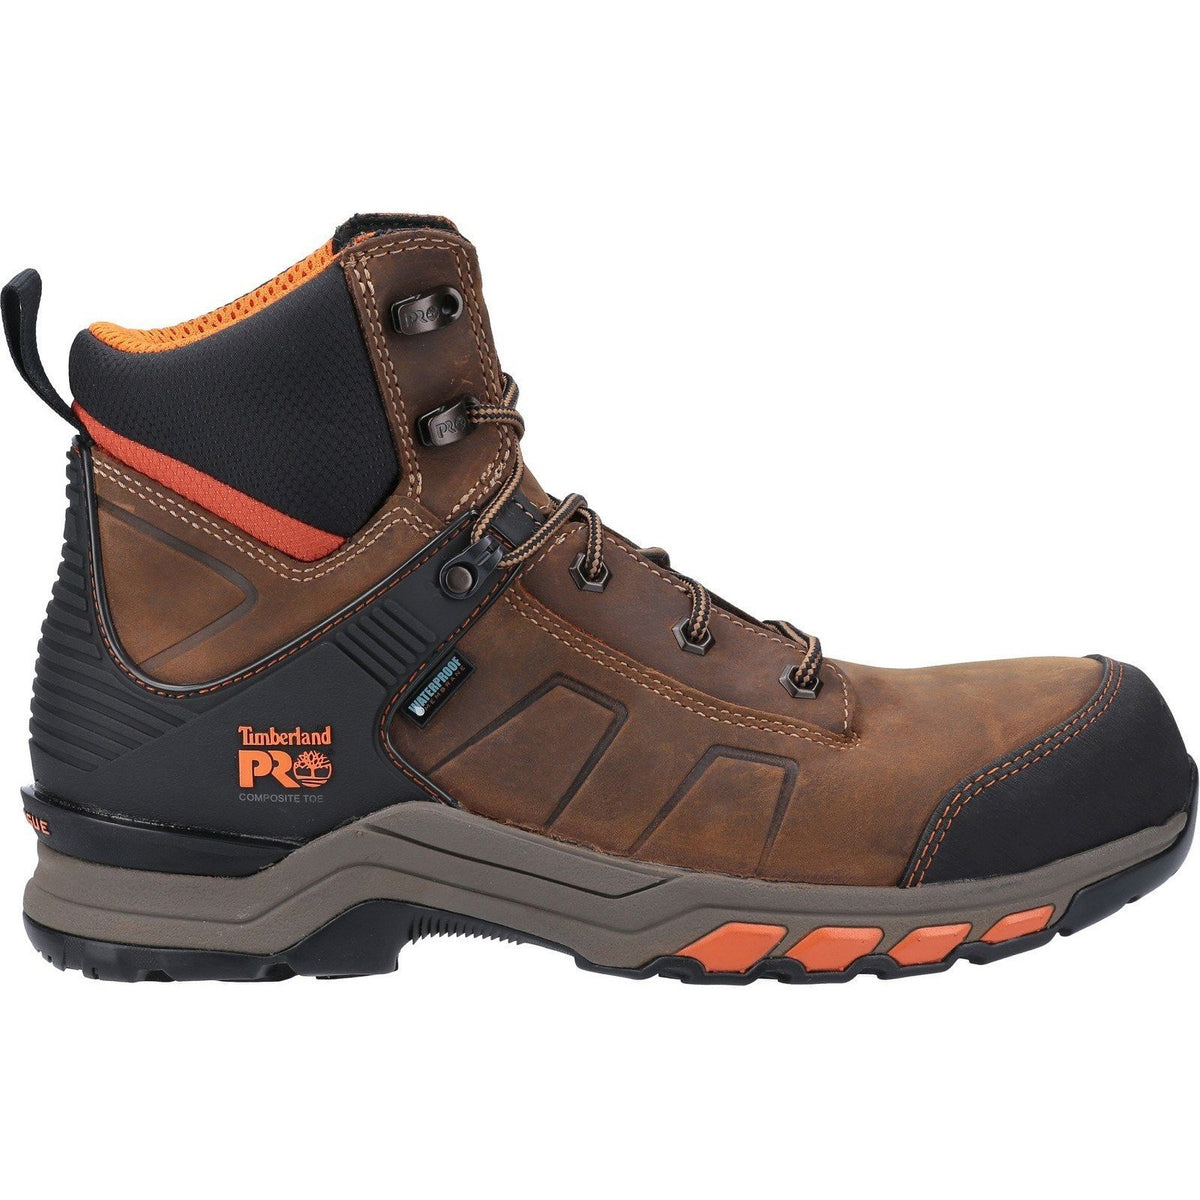 Timberland Pro NEW Leather Hypercharge S3 Safety Boot with Composite Toe Cap